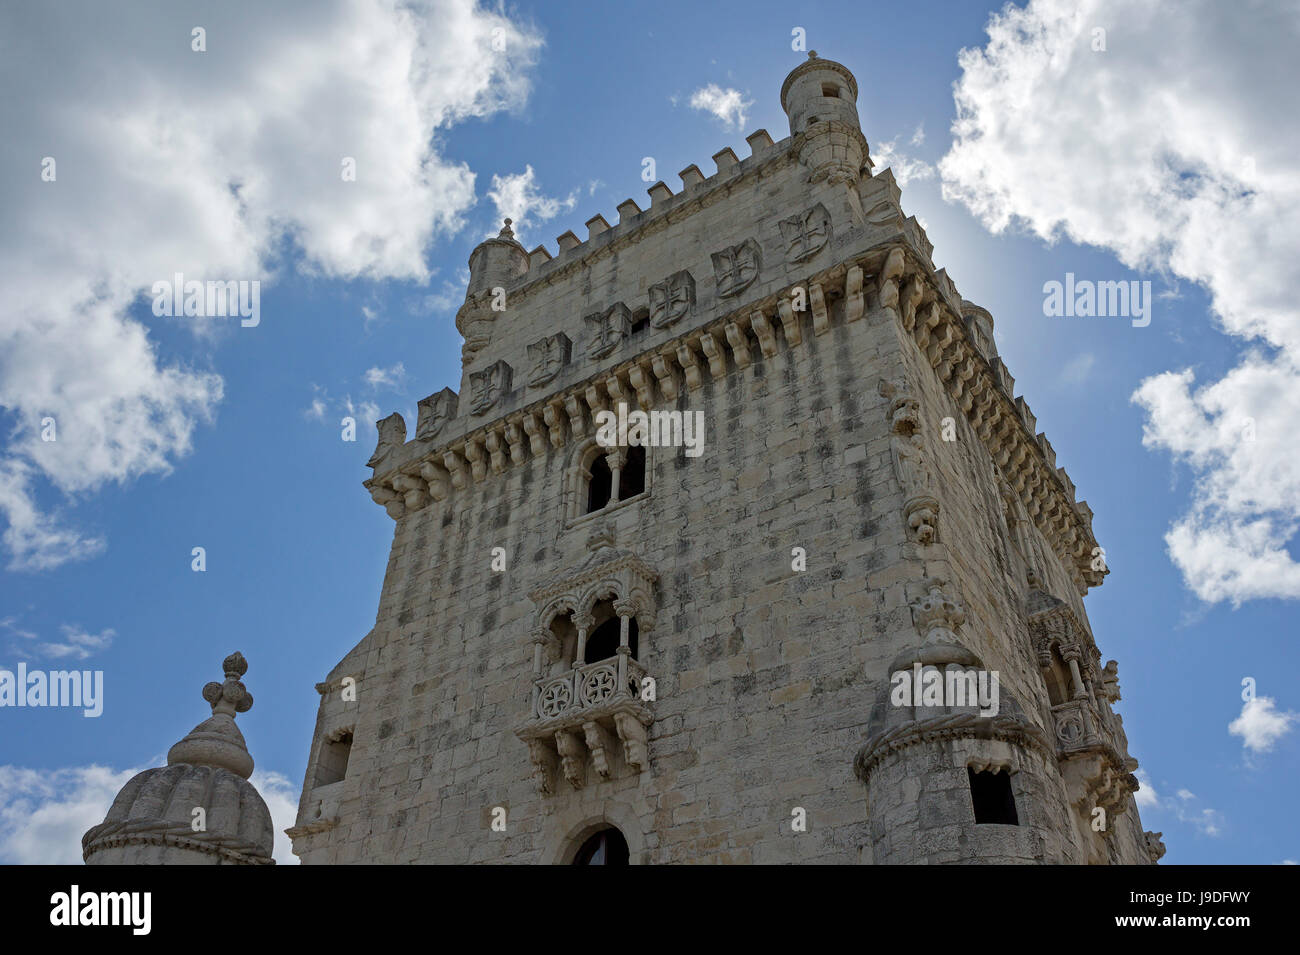 tower, historical, sightseeing, portugal, lisbon, emblem, tower, buildings, Stock Photo